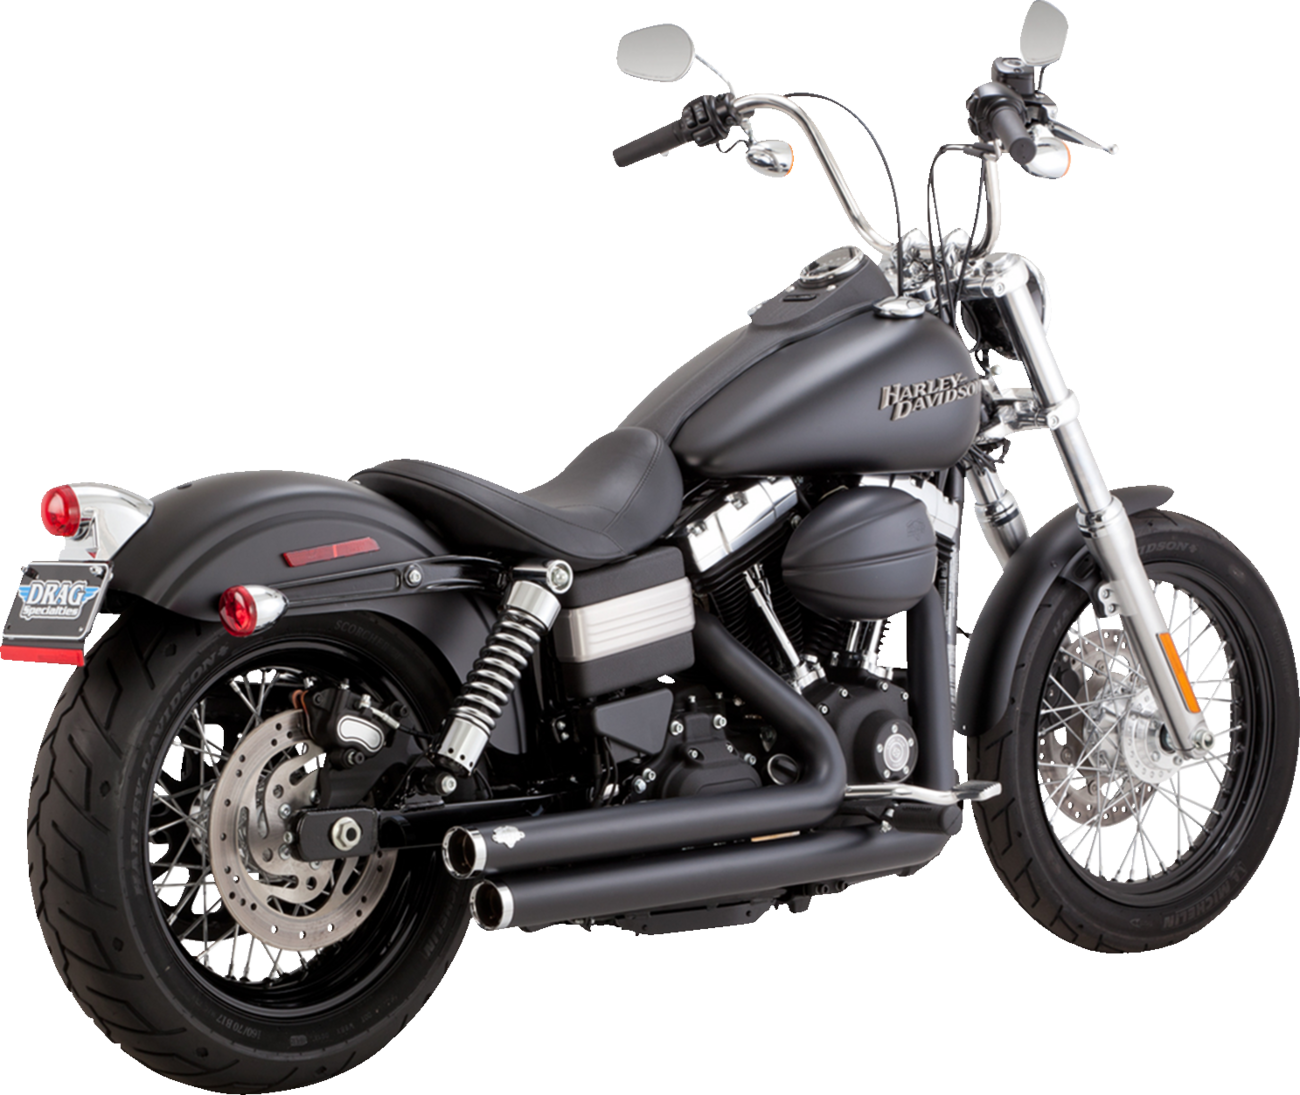 Vance & Hines Big Shots Staggered Black Exhaust System for 2006-2009 Harley Dyna